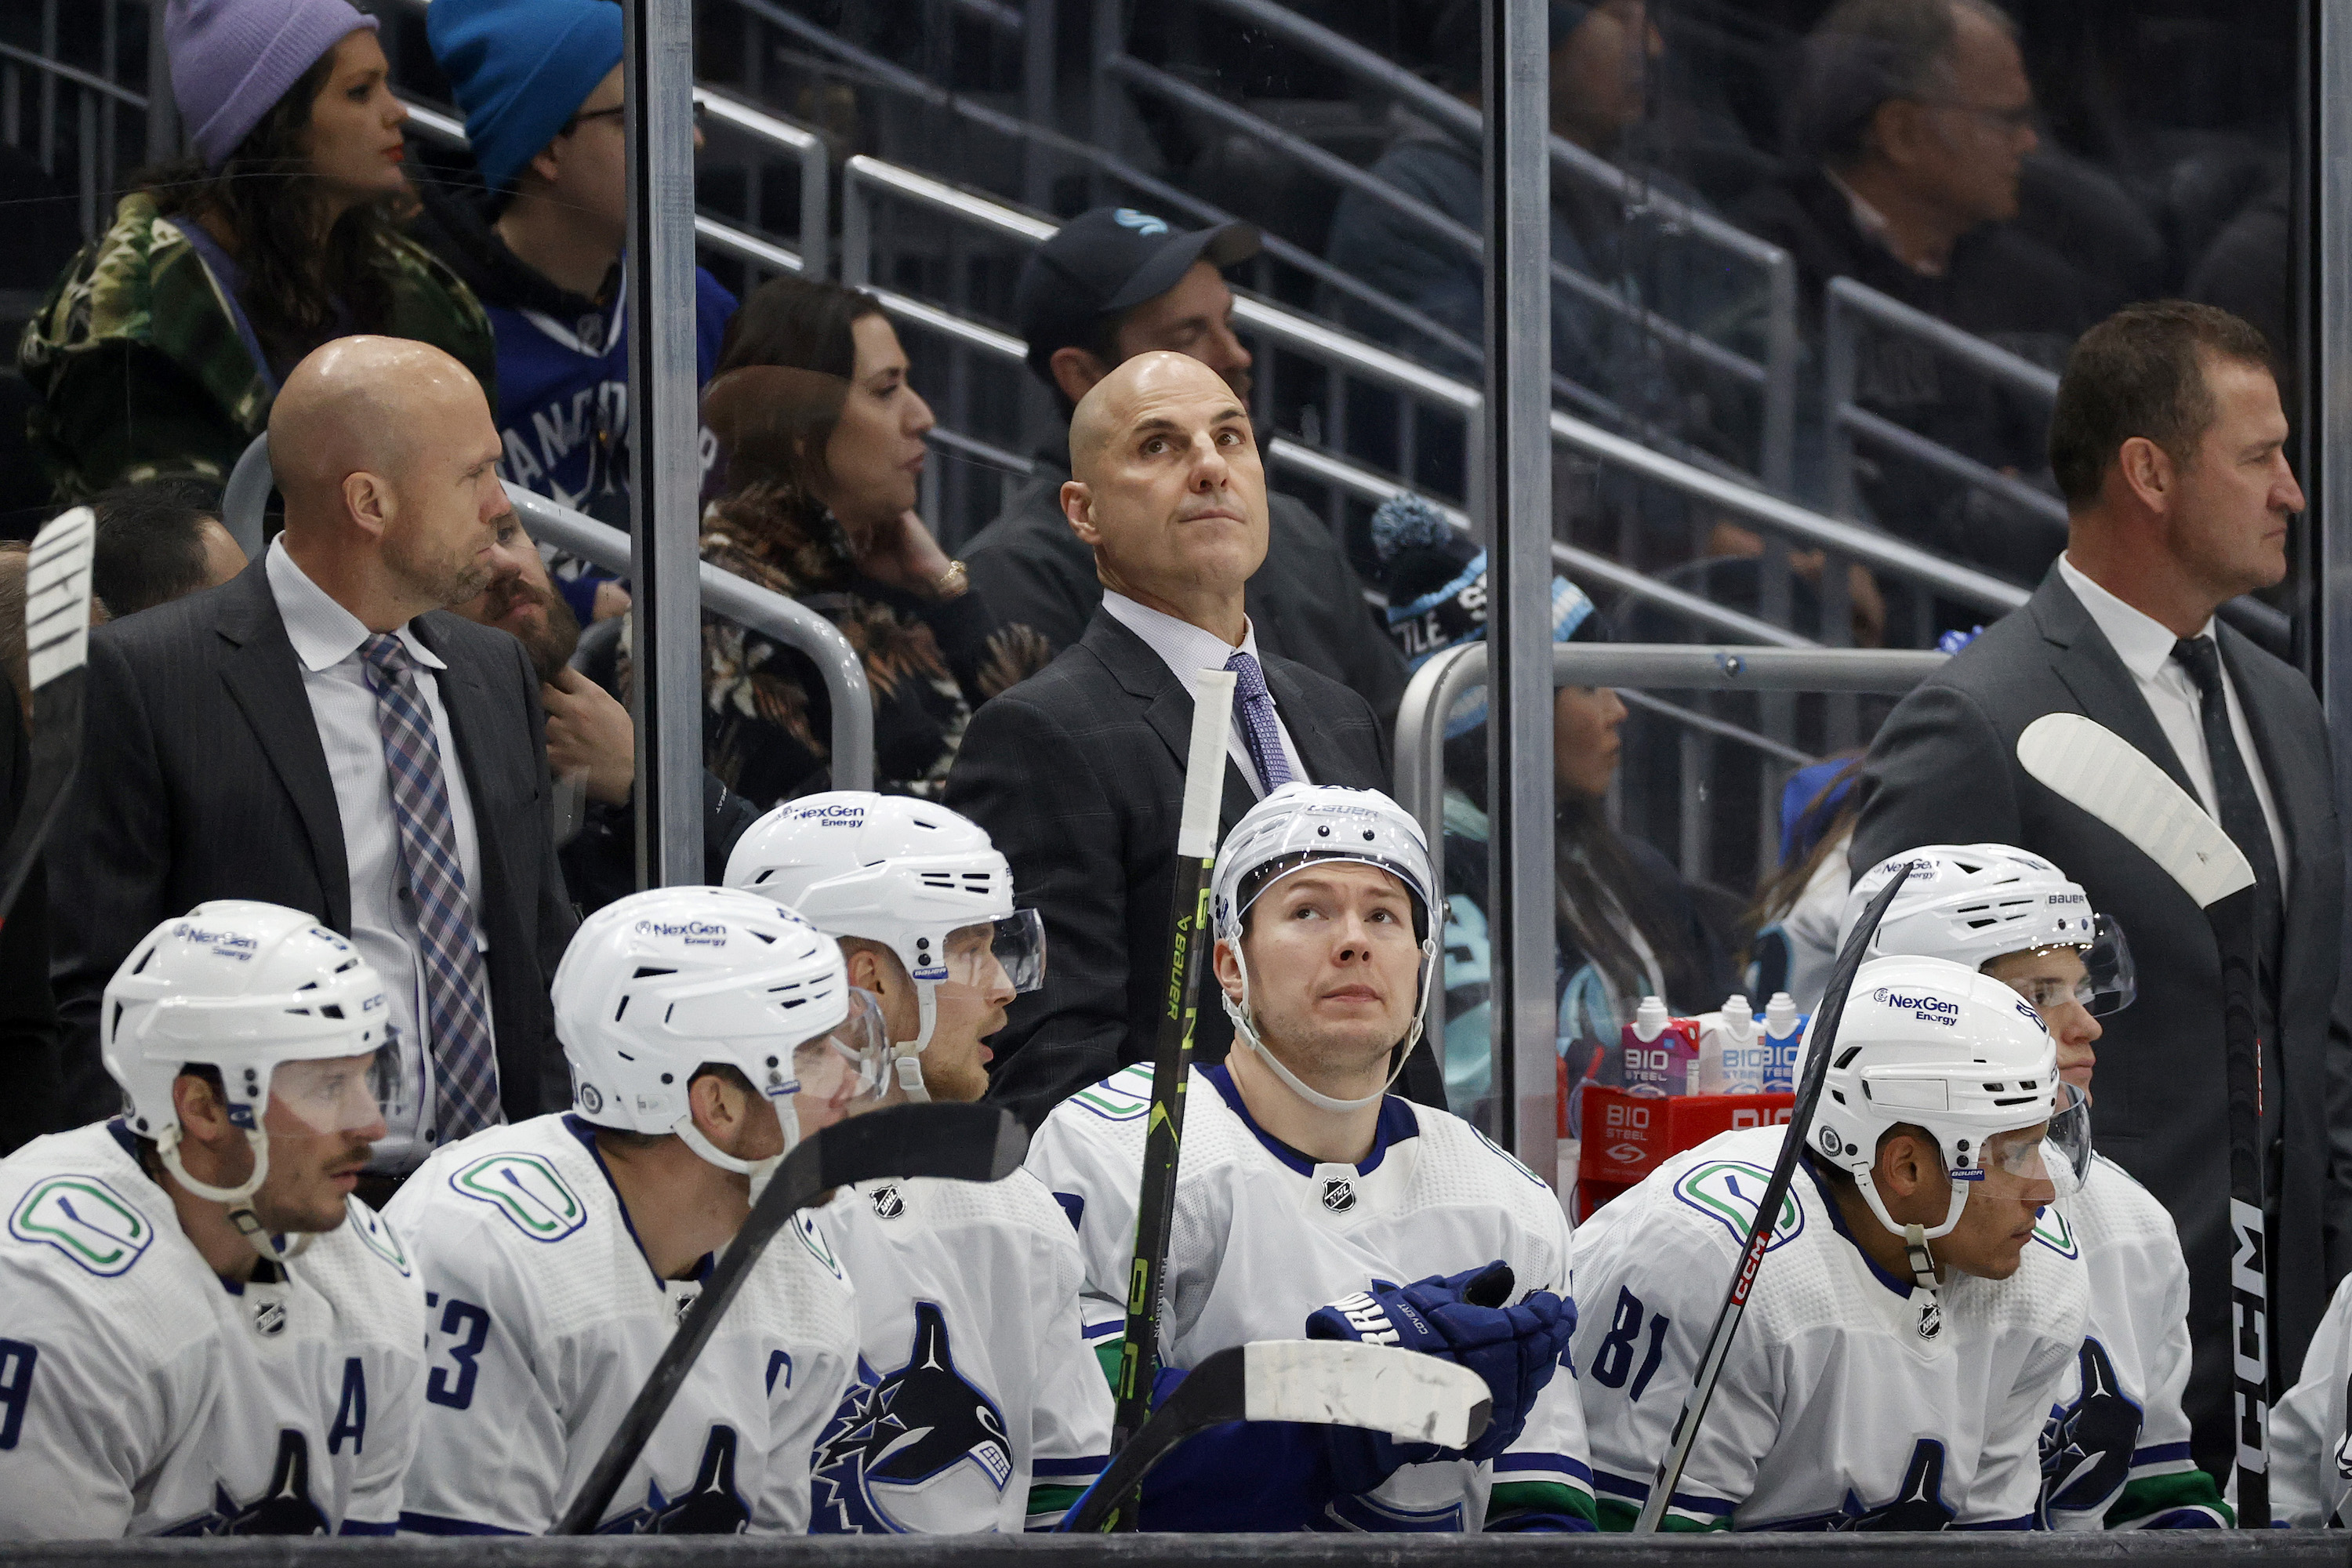 SEATTLE, WASHINGTON - JANUARY 25: Head coach Rick Tocchet of the Vancouver Canucks looks on during the third period against the Seattle Kraken at Climate Pledge Arena on January 25, 2023 in Seattle, Washington.